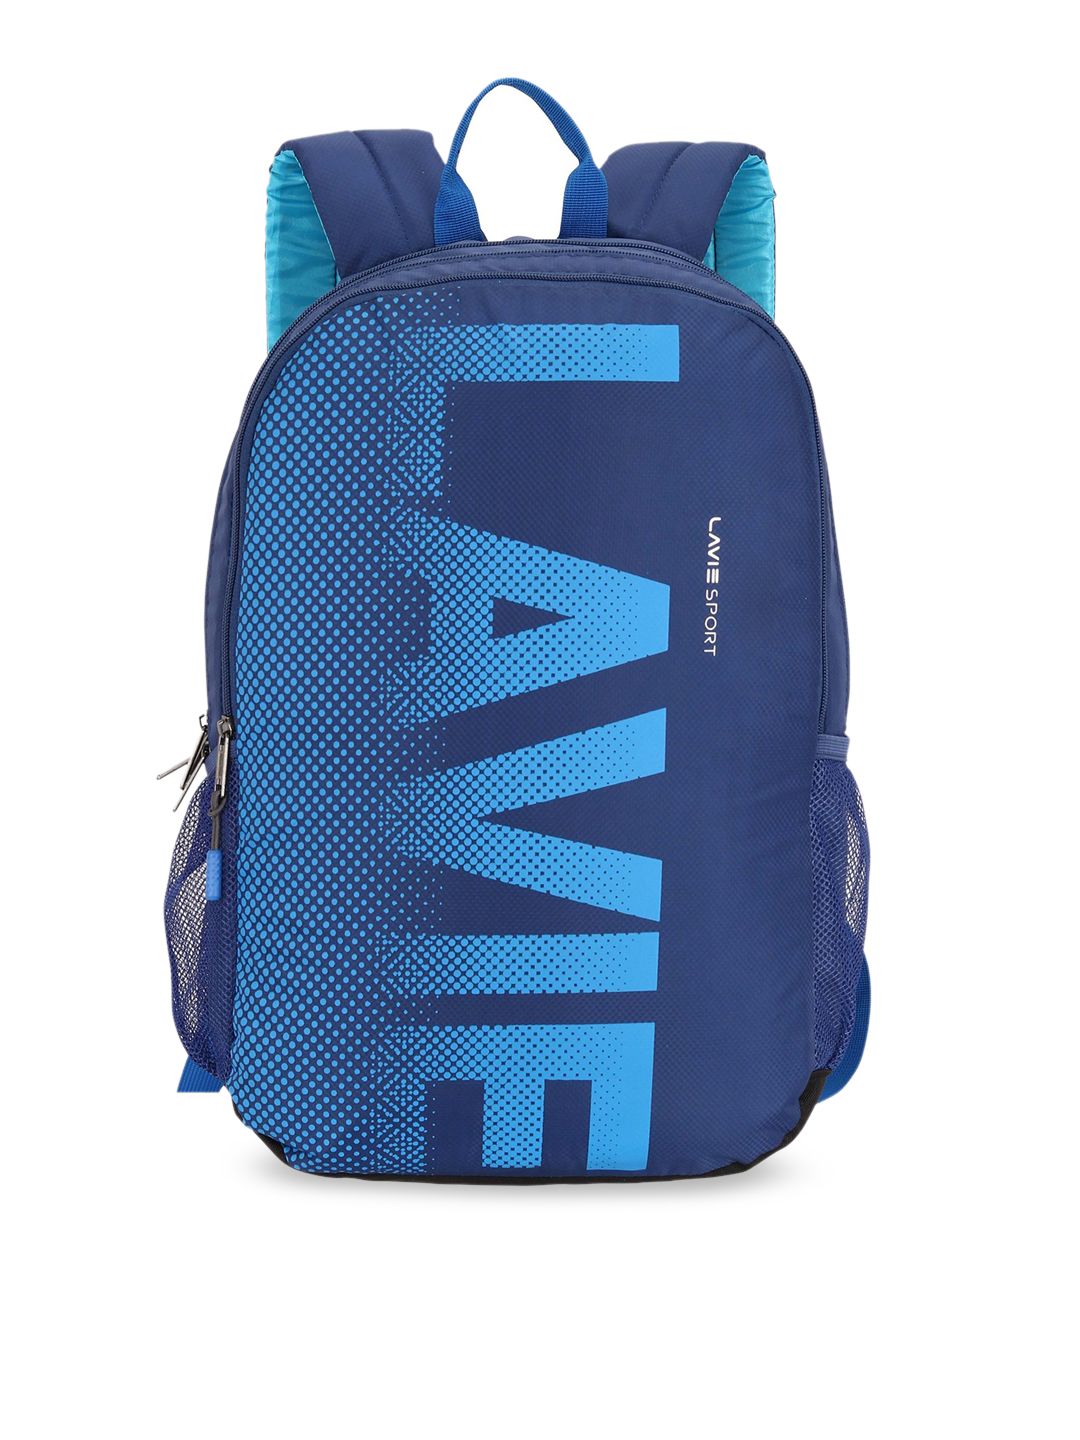 LAVIE SPORT Unisex Blue Typography Backpack Price in India